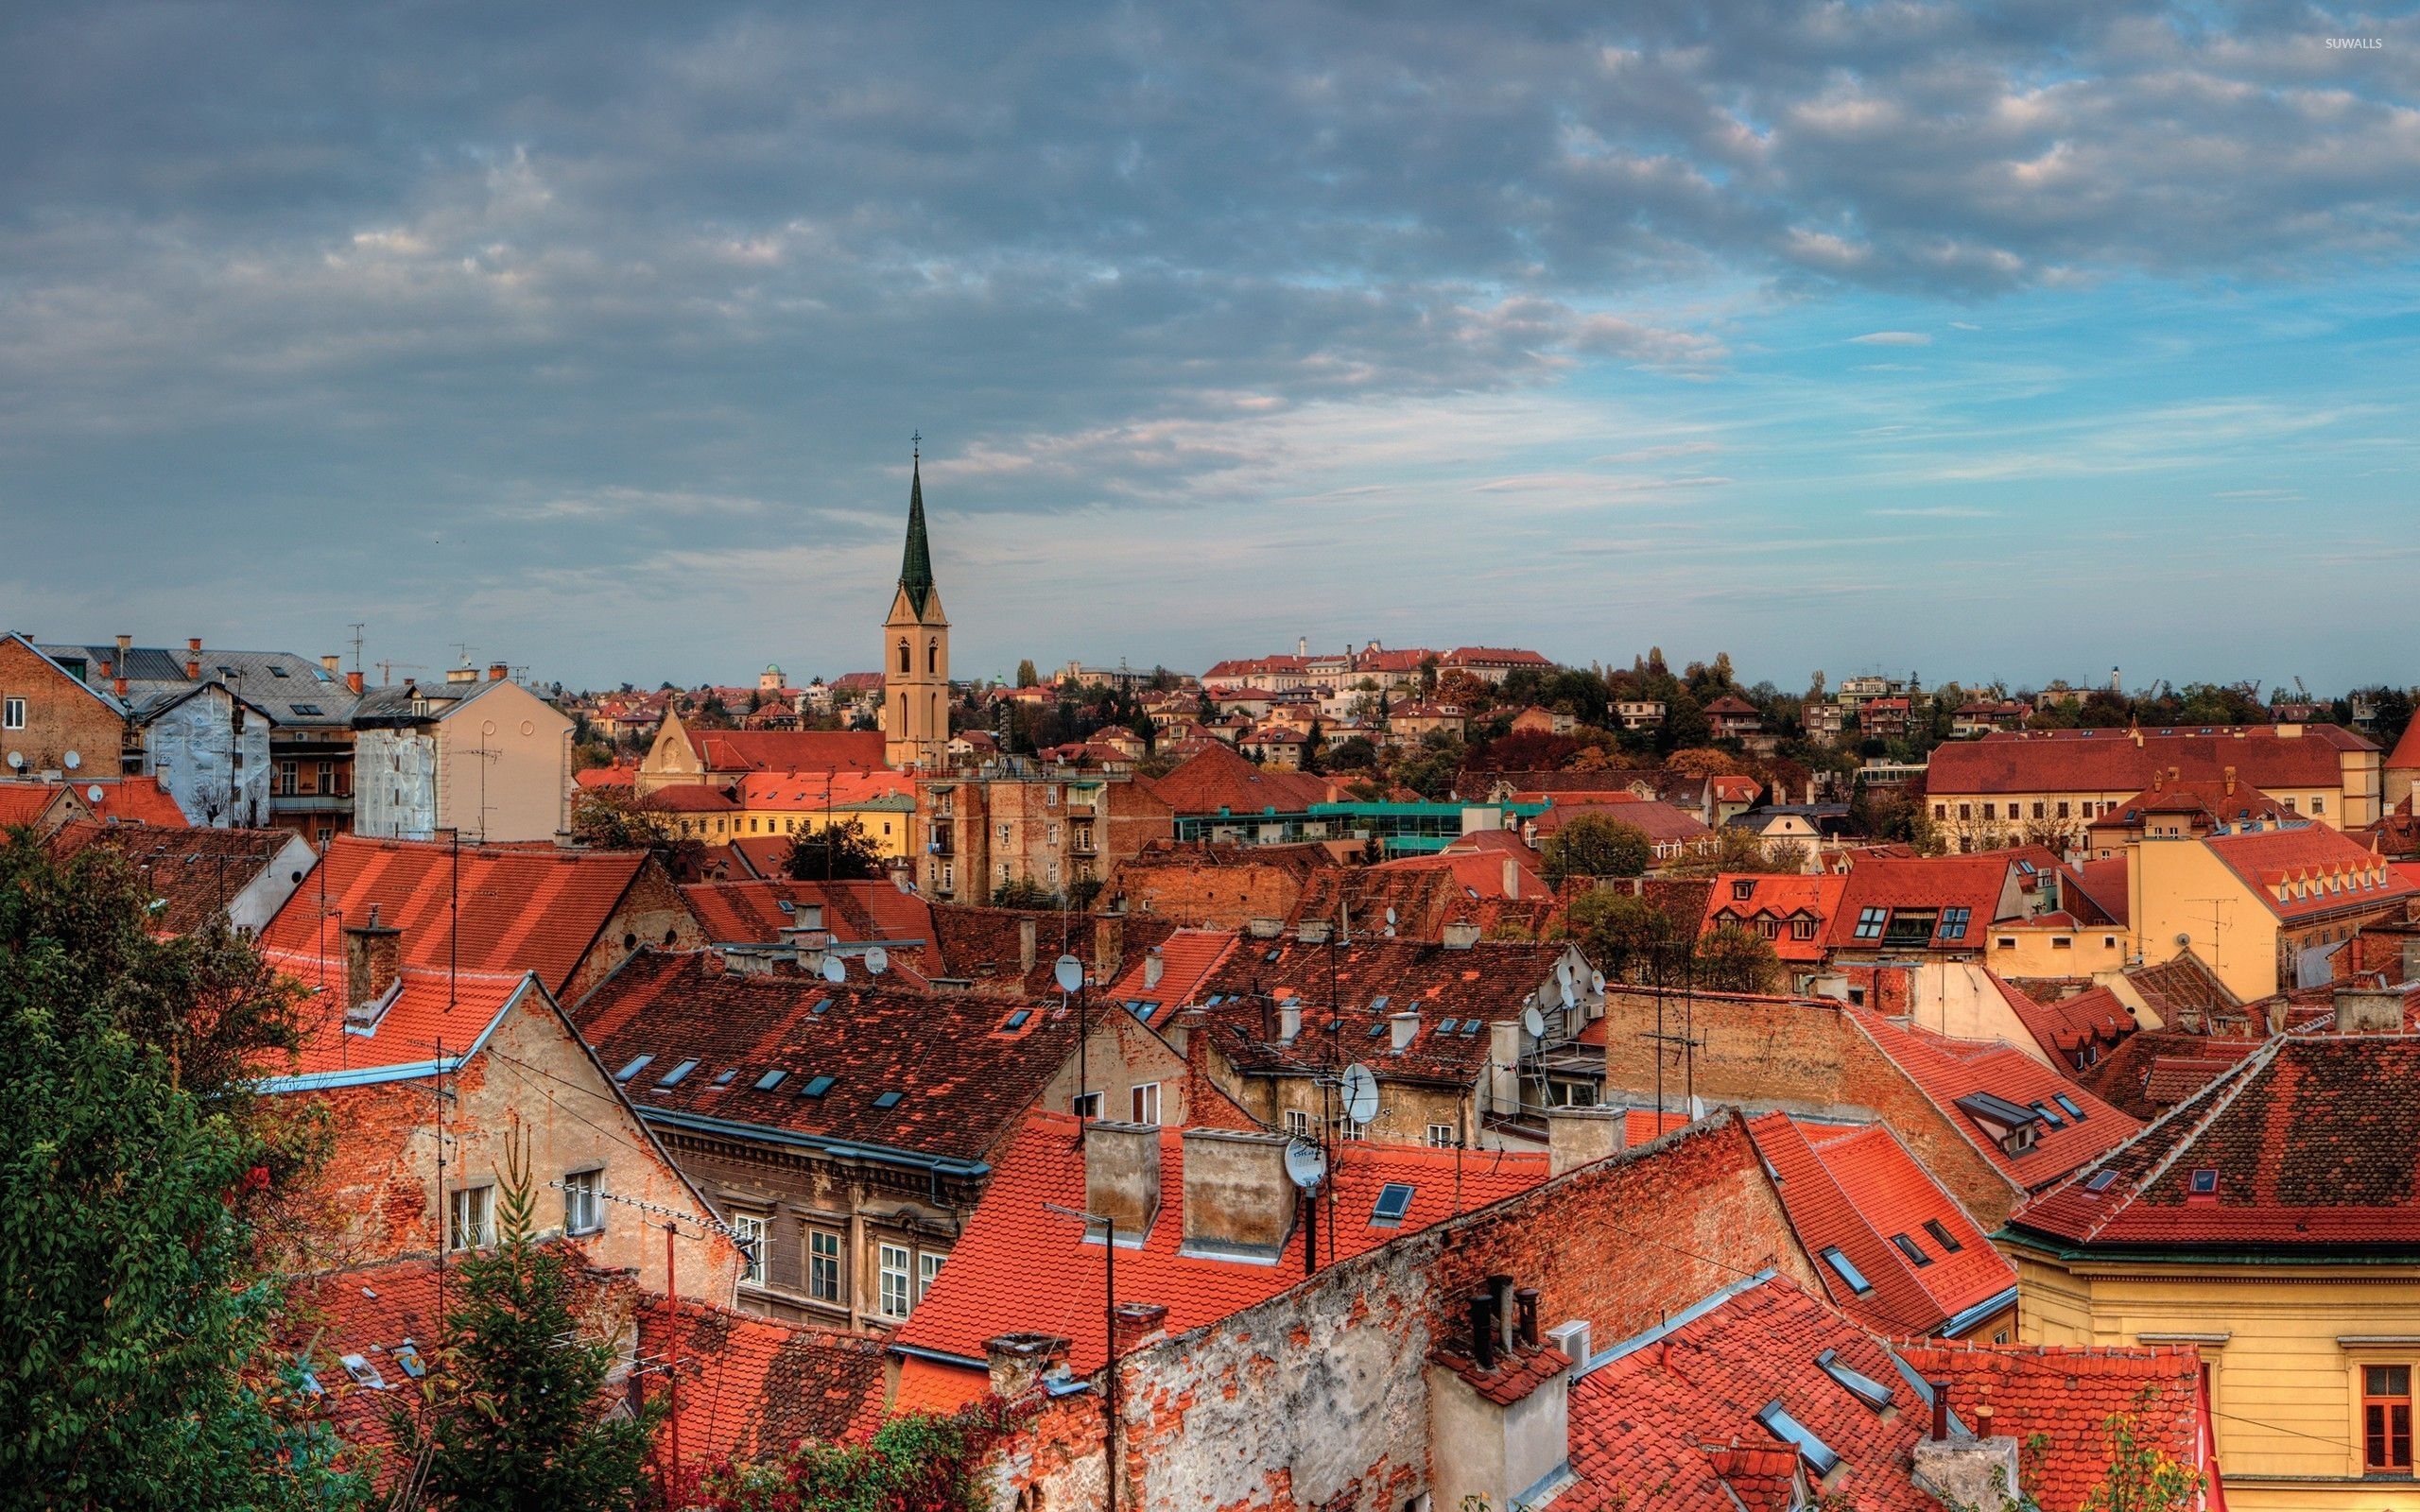 Croatia: Zagreb, A city with a rich history dating from Roman times. 2560x1600 HD Wallpaper.